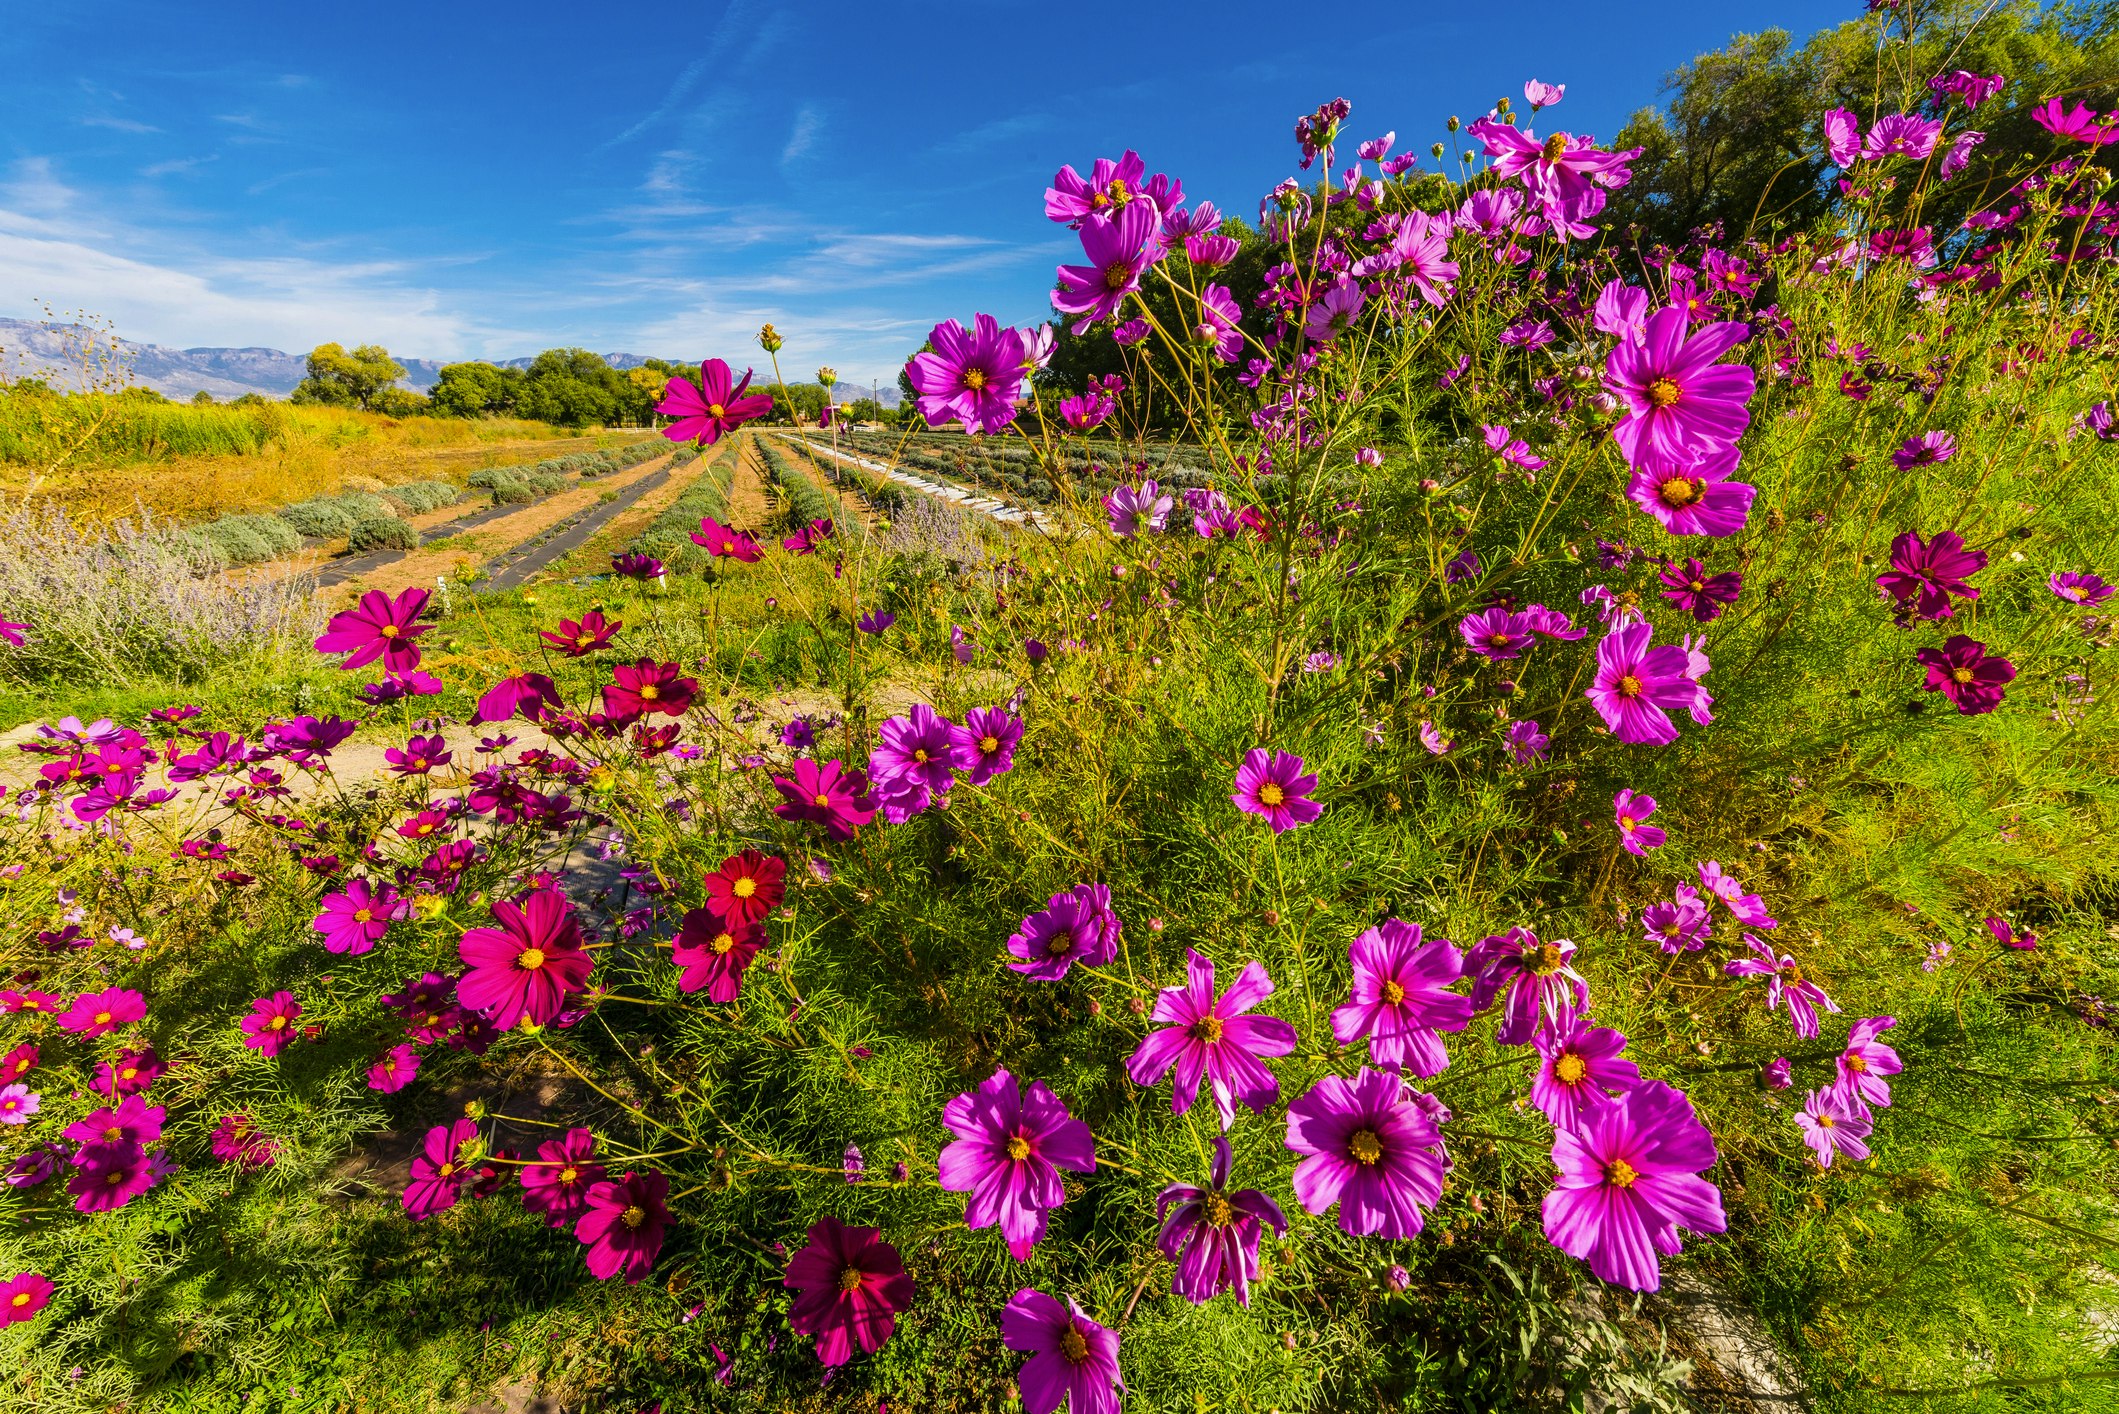 Bright pink flowers spray at the viewer with a lavender field in the background against a bright blue sky at Los Poblanos Historic Inn and Organic Farm, a popular agritourism destination in Albuquerque